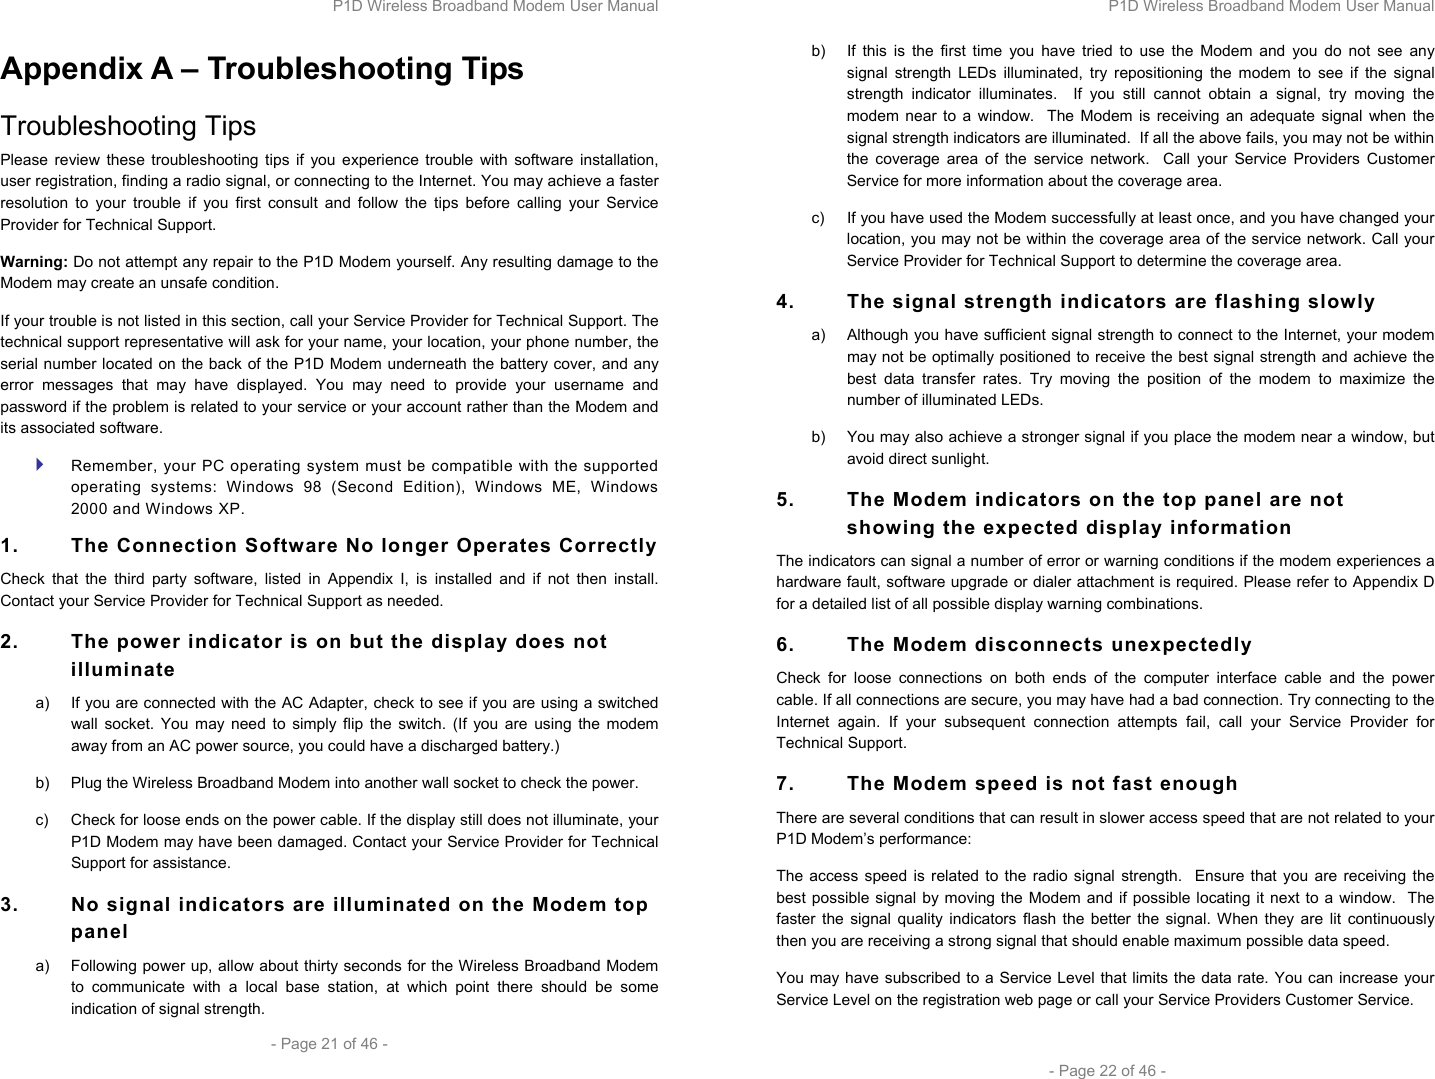 P1D Wireless Broadband Modem User Manual  - Page 21 of 46 -  Appendix A – Troubleshooting Tips Troubleshooting Tips Please review these troubleshooting tips if you experience trouble with software installation, user registration, finding a radio signal, or connecting to the Internet. You may achieve a faster resolution to your trouble if you first consult and follow the tips before calling your Service Provider for Technical Support.  Warning: Do not attempt any repair to the P1D Modem yourself. Any resulting damage to the Modem may create an unsafe condition.  If your trouble is not listed in this section, call your Service Provider for Technical Support. The technical support representative will ask for your name, your location, your phone number, the serial number located on the back of the P1D Modem underneath the battery cover, and any error messages that may have displayed. You may need to provide your username and password if the problem is related to your service or your account rather than the Modem and its associated software.  Remember, your PC operating system must be compatible with the supported operating systems: Windows 98 (Second Edition), Windows ME, Windows 2000 and Windows XP. 1.  The Connection Software No longer Operates Correctly Check that the third party software, listed in Appendix I, is installed and if not then install. Contact your Service Provider for Technical Support as needed. 2.  The power indicator is on but the display does not illuminate a)  If you are connected with the AC Adapter, check to see if you are using a switched wall socket. You may need to simply flip the switch. (If you are using the modem away from an AC power source, you could have a discharged battery.) b)  Plug the Wireless Broadband Modem into another wall socket to check the power. c)  Check for loose ends on the power cable. If the display still does not illuminate, your P1D Modem may have been damaged. Contact your Service Provider for Technical Support for assistance.  3.  No signal indicators are illuminated on the Modem top panel a)  Following power up, allow about thirty seconds for the Wireless Broadband Modem to communicate with a local base station, at which point there should be some indication of signal strength. P1D Wireless Broadband Modem User Manual  - Page 22 of 46 - b)  If this is the first time you have tried to use the Modem and you do not see any signal strength LEDs illuminated, try repositioning the modem to see if the signal strength indicator illuminates.  If you still cannot obtain a signal, try moving the modem near to a window.  The Modem is receiving an adequate signal when the signal strength indicators are illuminated.  If all the above fails, you may not be within the coverage area of the service network.  Call your Service Providers Customer Service for more information about the coverage area. c)  If you have used the Modem successfully at least once, and you have changed your location, you may not be within the coverage area of the service network. Call your Service Provider for Technical Support to determine the coverage area. 4.  The signal strength indicators are flashing slowly a)  Although you have sufficient signal strength to connect to the Internet, your modem may not be optimally positioned to receive the best signal strength and achieve the best data transfer rates. Try moving the position of the modem to maximize the number of illuminated LEDs.  b)  You may also achieve a stronger signal if you place the modem near a window, but avoid direct sunlight. 5.  The Modem indicators on the top panel are not showing the expected display information The indicators can signal a number of error or warning conditions if the modem experiences a hardware fault, software upgrade or dialer attachment is required. Please refer to Appendix D for a detailed list of all possible display warning combinations. 6.  The Modem disconnects unexpectedly Check for loose connections on both ends of the computer interface cable and the power cable. If all connections are secure, you may have had a bad connection. Try connecting to the Internet again. If your subsequent connection attempts fail, call your Service Provider for Technical Support. 7.  The Modem speed is not fast enough There are several conditions that can result in slower access speed that are not related to your P1D Modem’s performance: The access speed is related to the radio signal strength.  Ensure that you are receiving the best possible signal by moving the Modem and if possible locating it next to a window.  The faster the signal quality indicators flash the better the signal. When they are lit continuously then you are receiving a strong signal that should enable maximum possible data speed. You may have subscribed to a Service Level that limits the data rate. You can increase your Service Level on the registration web page or call your Service Providers Customer Service. 